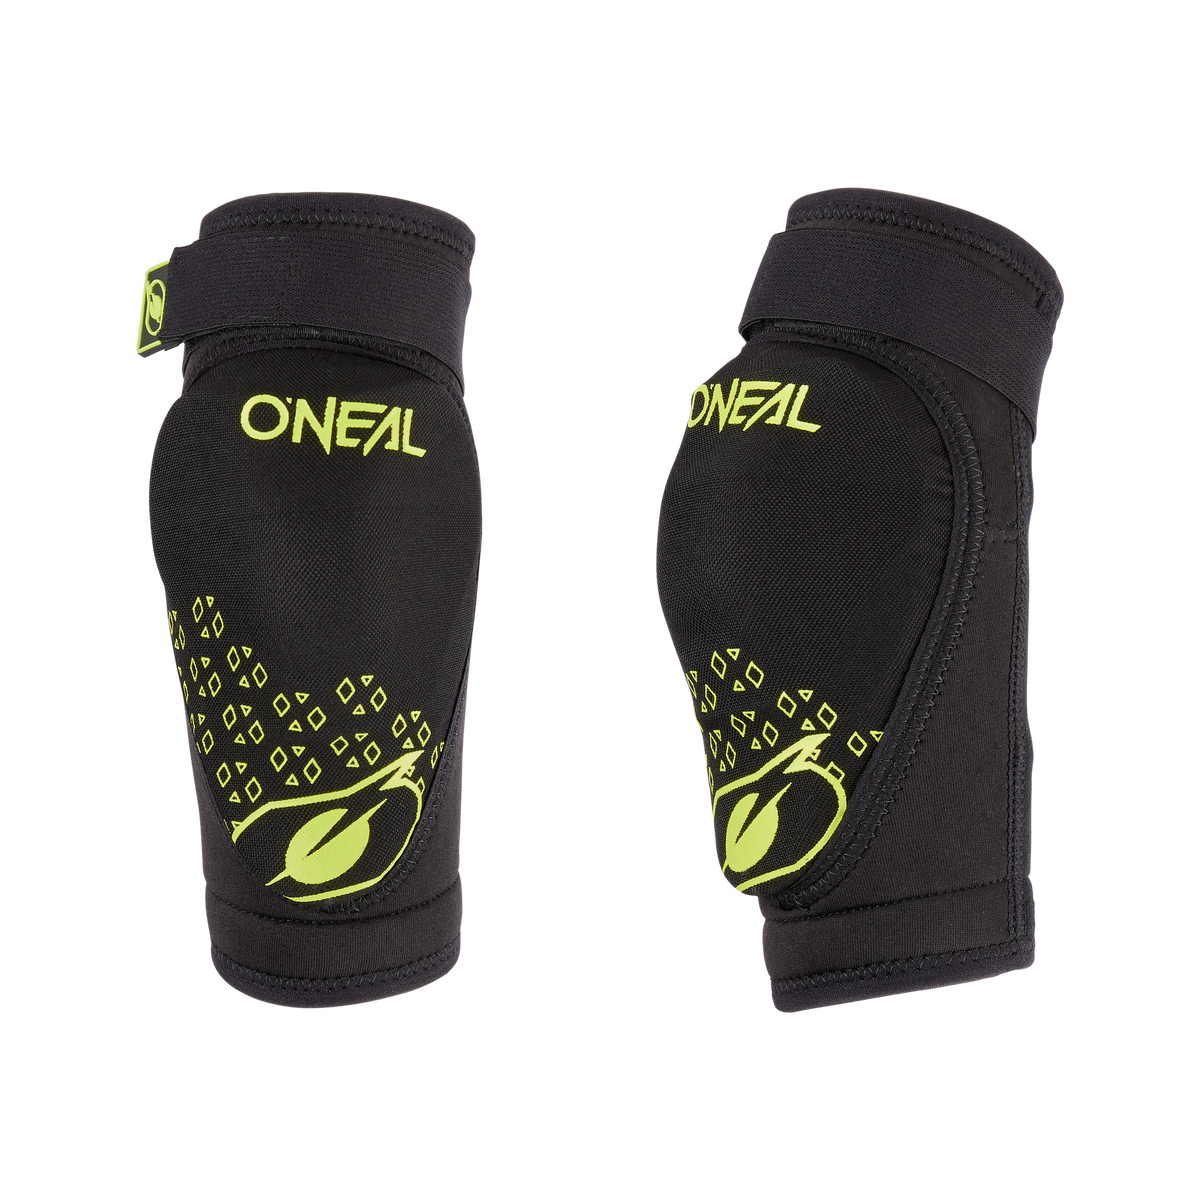 https://cdn.oneal.eu/assets/_default_upload_bucket/2023_ONeal_DIRT%20Elbow%20Guard%20youth%20V.23_black_neon%20yellow_front.png